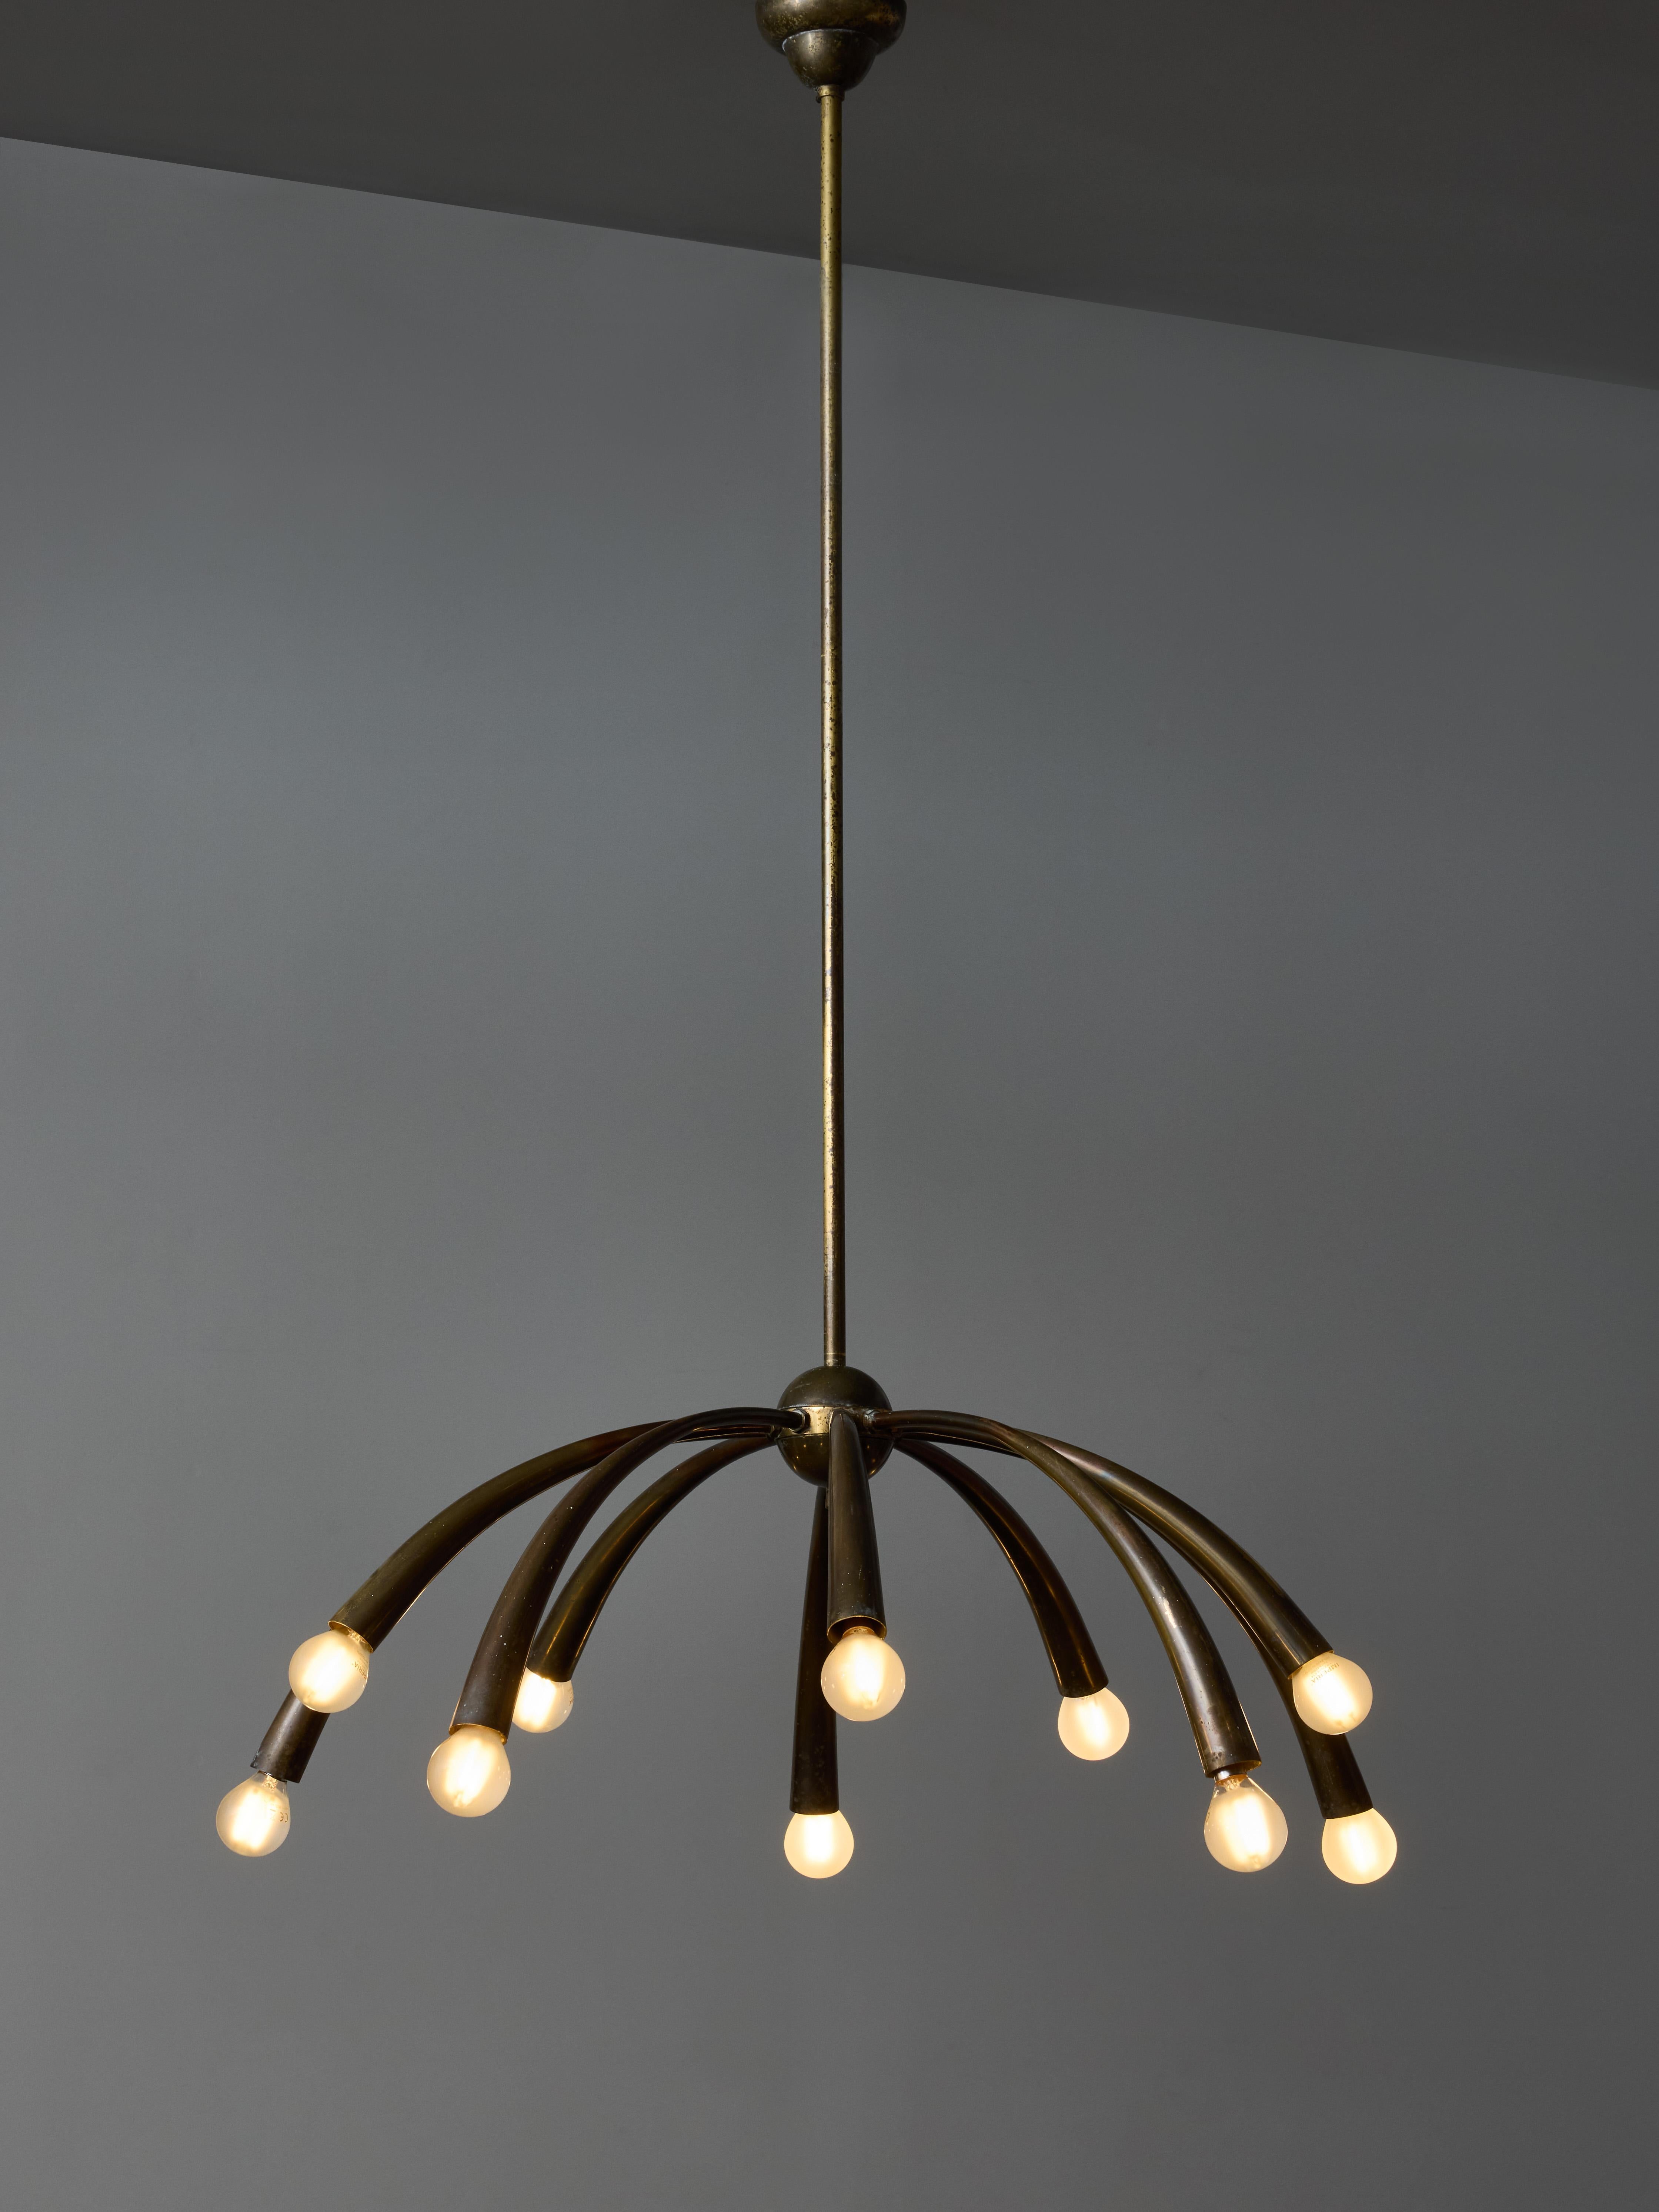 Mid century chandelier designed by Oscar Torlasco for Lumi, all made in patinated brass.
It is made of ten arms of light, tapered cones pointing downward with alternating height.

Vintage condition

Oscar Torlasco (1934-2004)

Oscar Torlasco is an